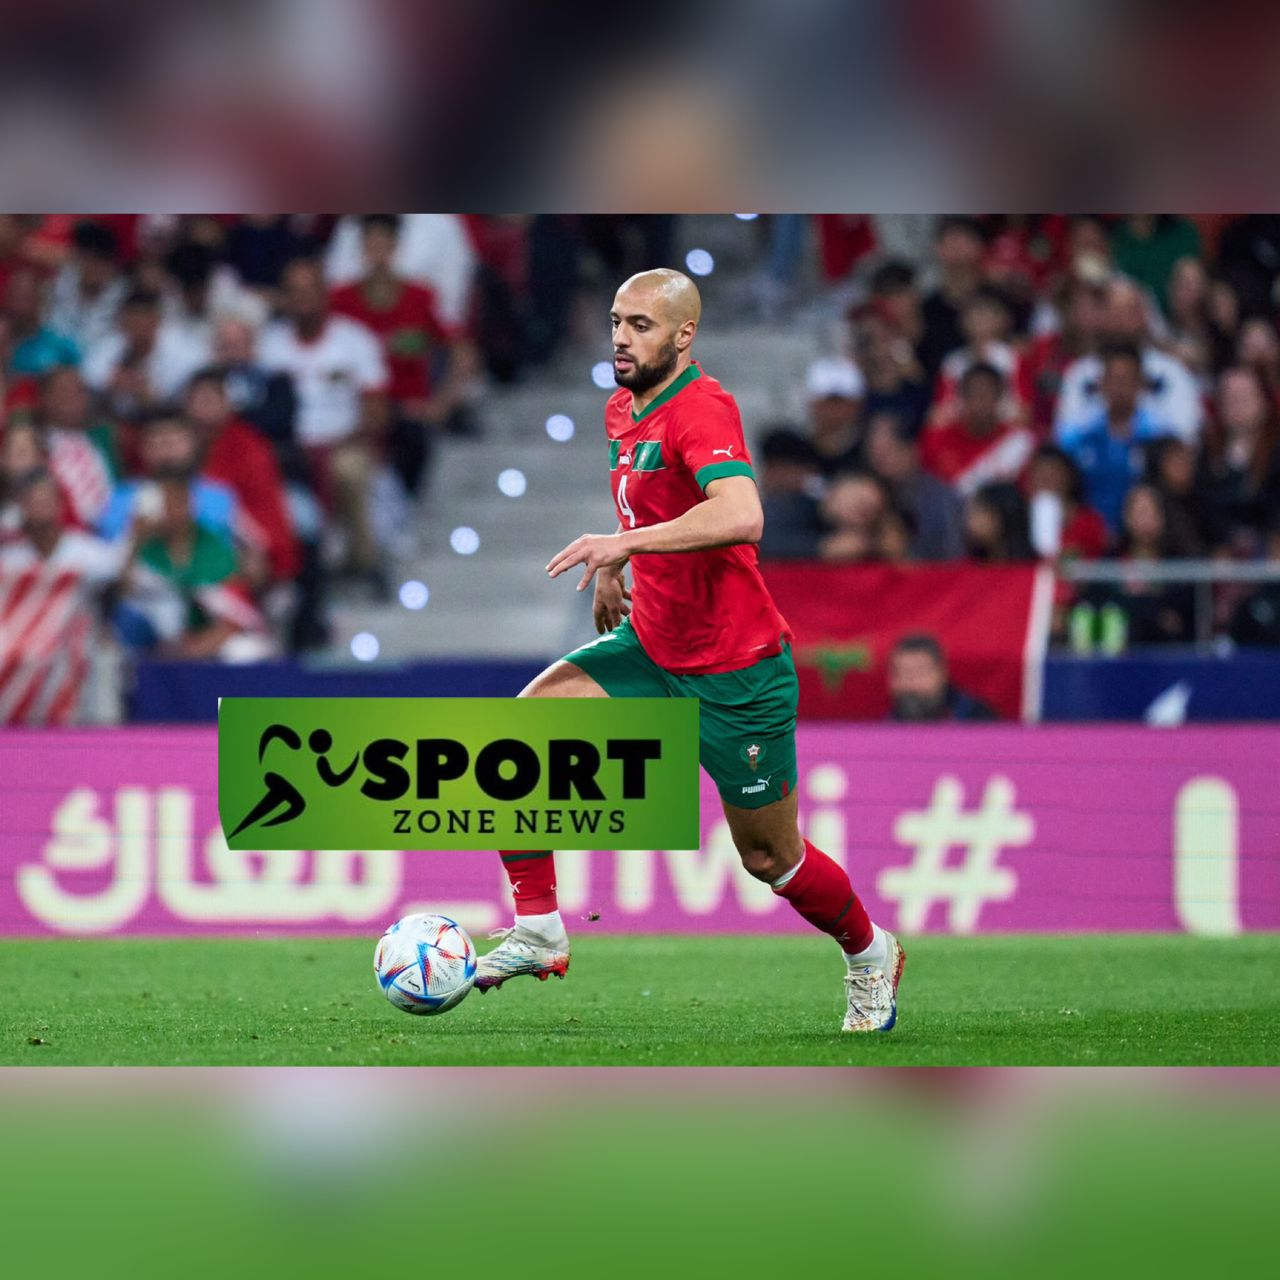 Breaking News: Sofyan Amrabat has withdrawn from the Morocco squad due to an injury, according to Manchester United